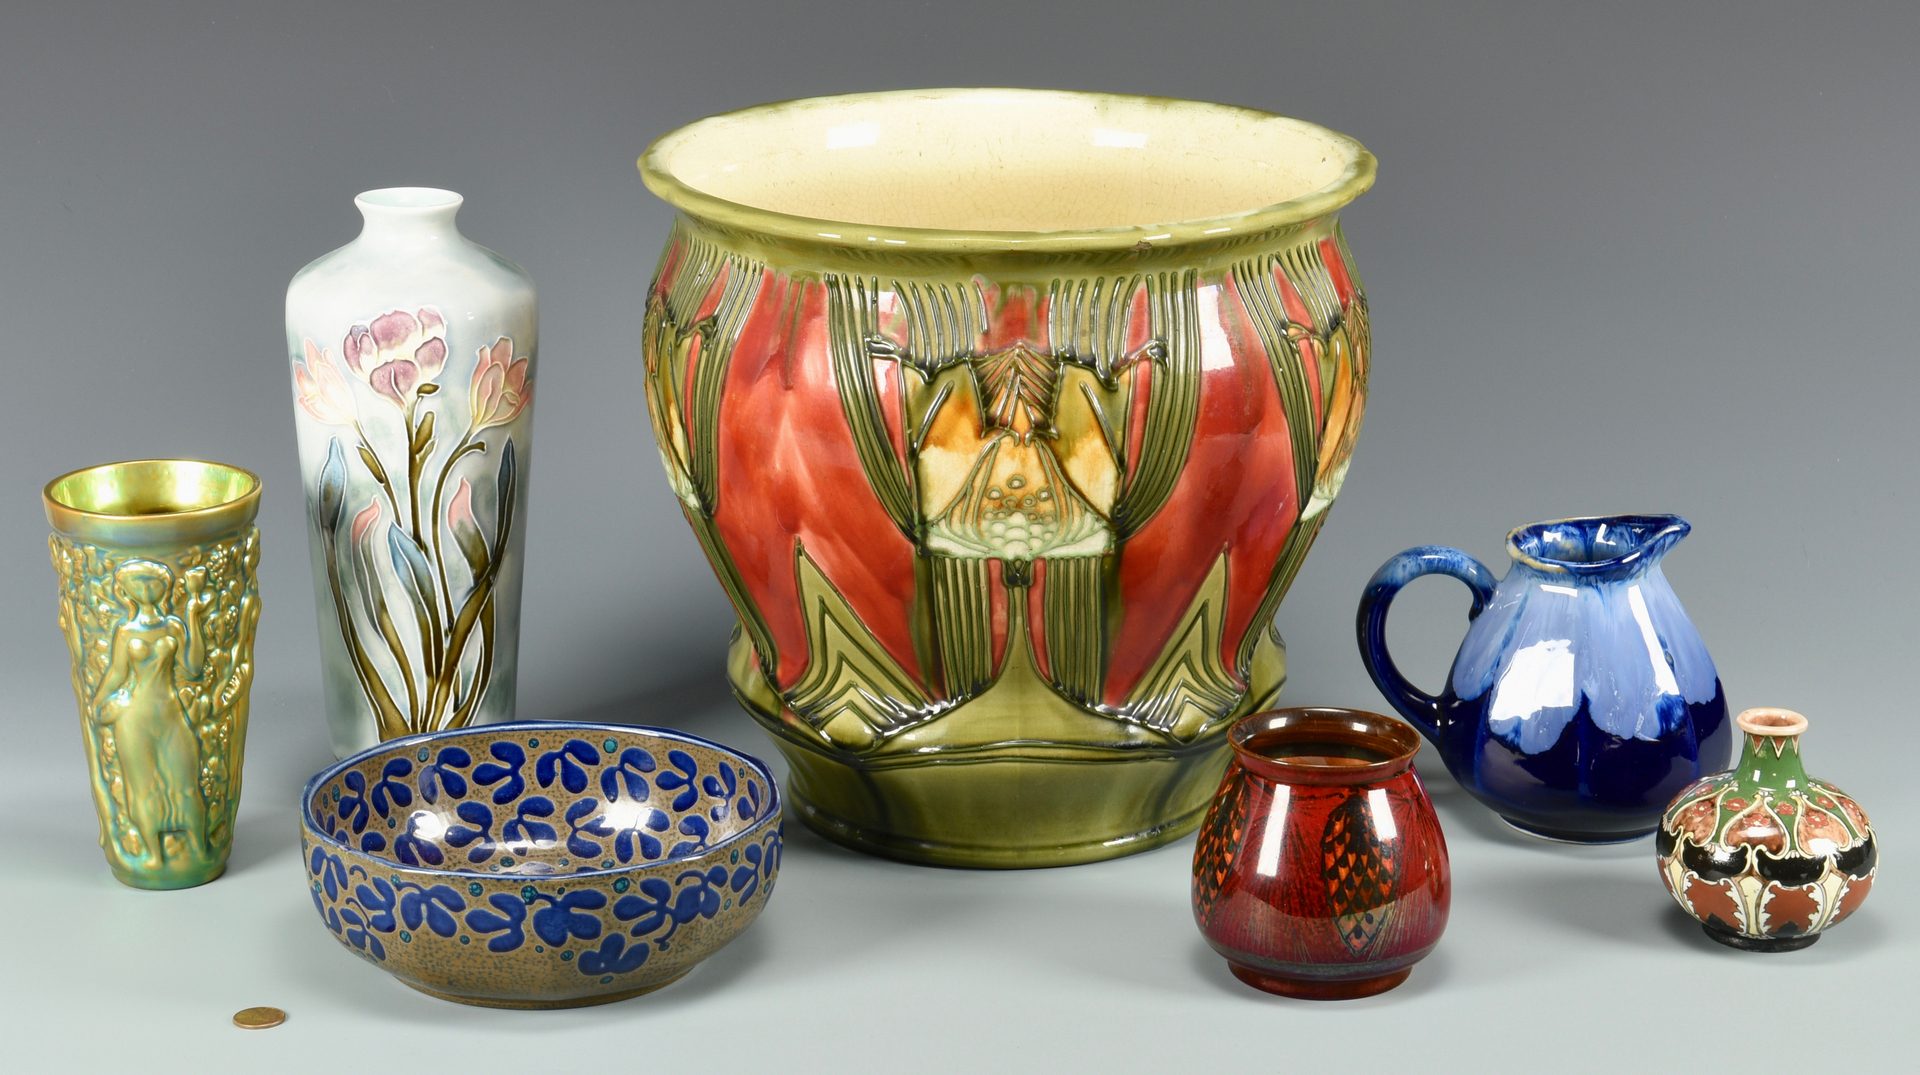 Lot 513: Group of 7 European Art Pottery Items | Case Auctions